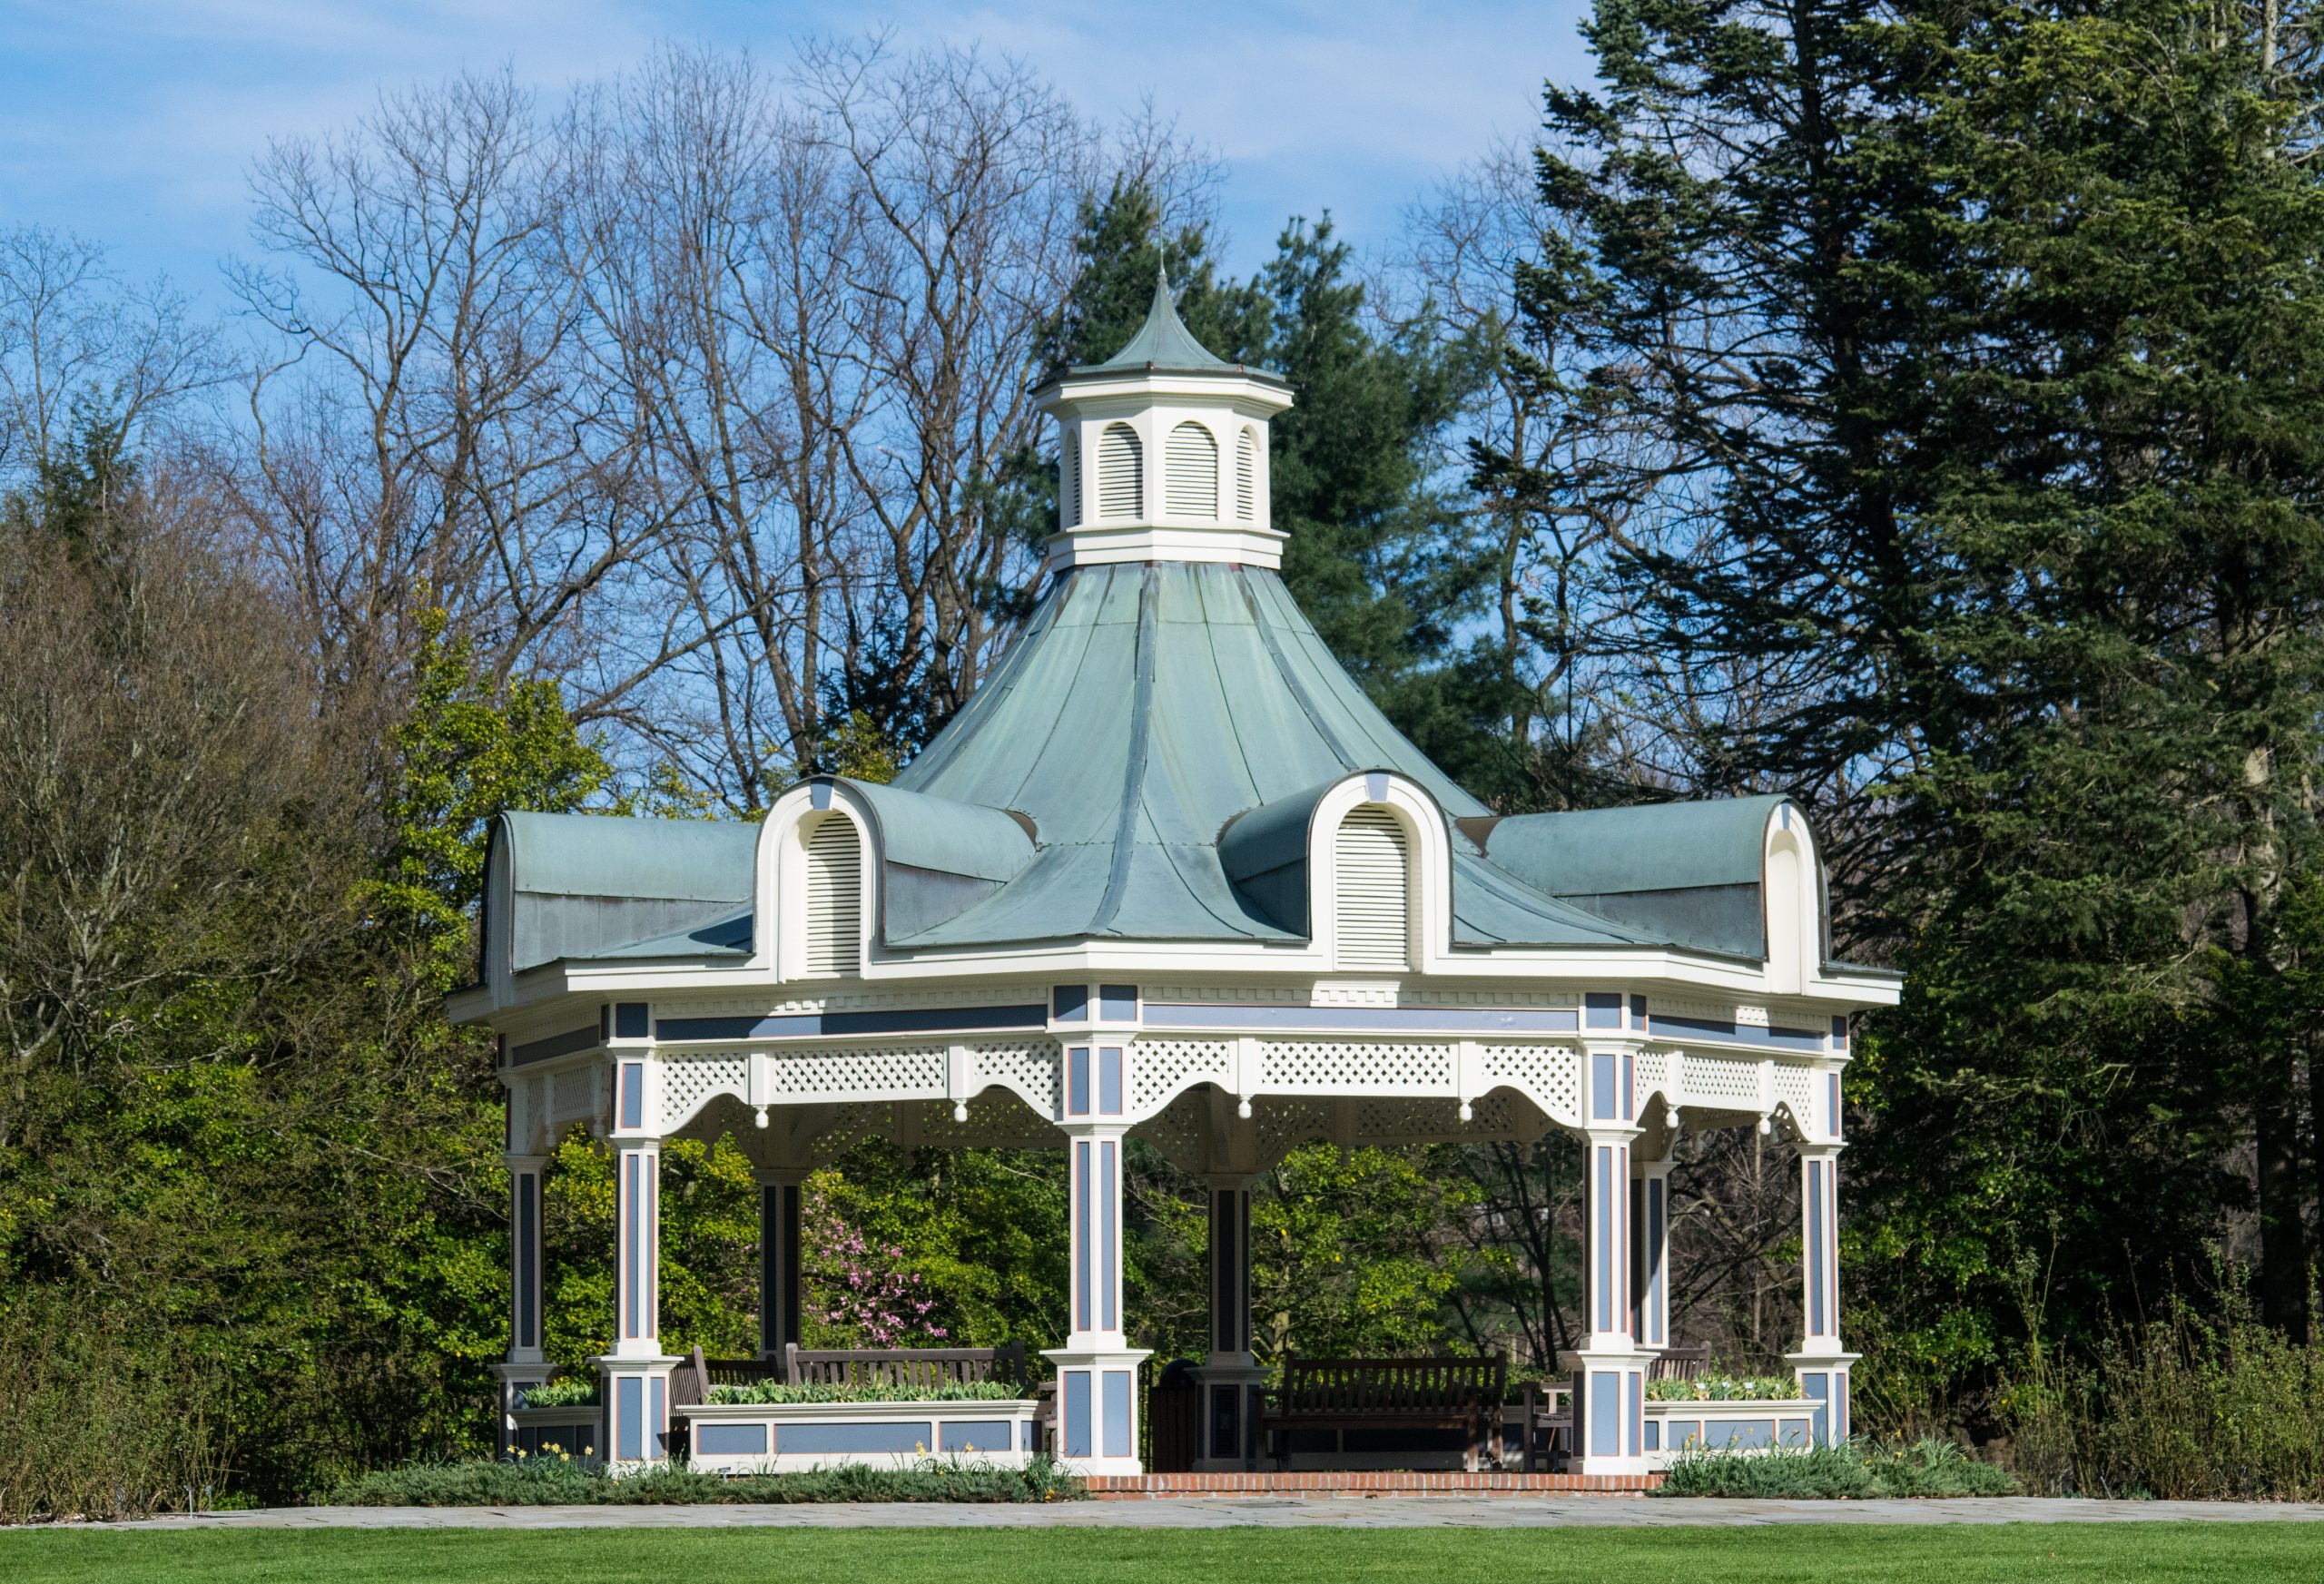 This beautiful gazebo is located in Fellows Riverside Gardens in Mill Creek Park